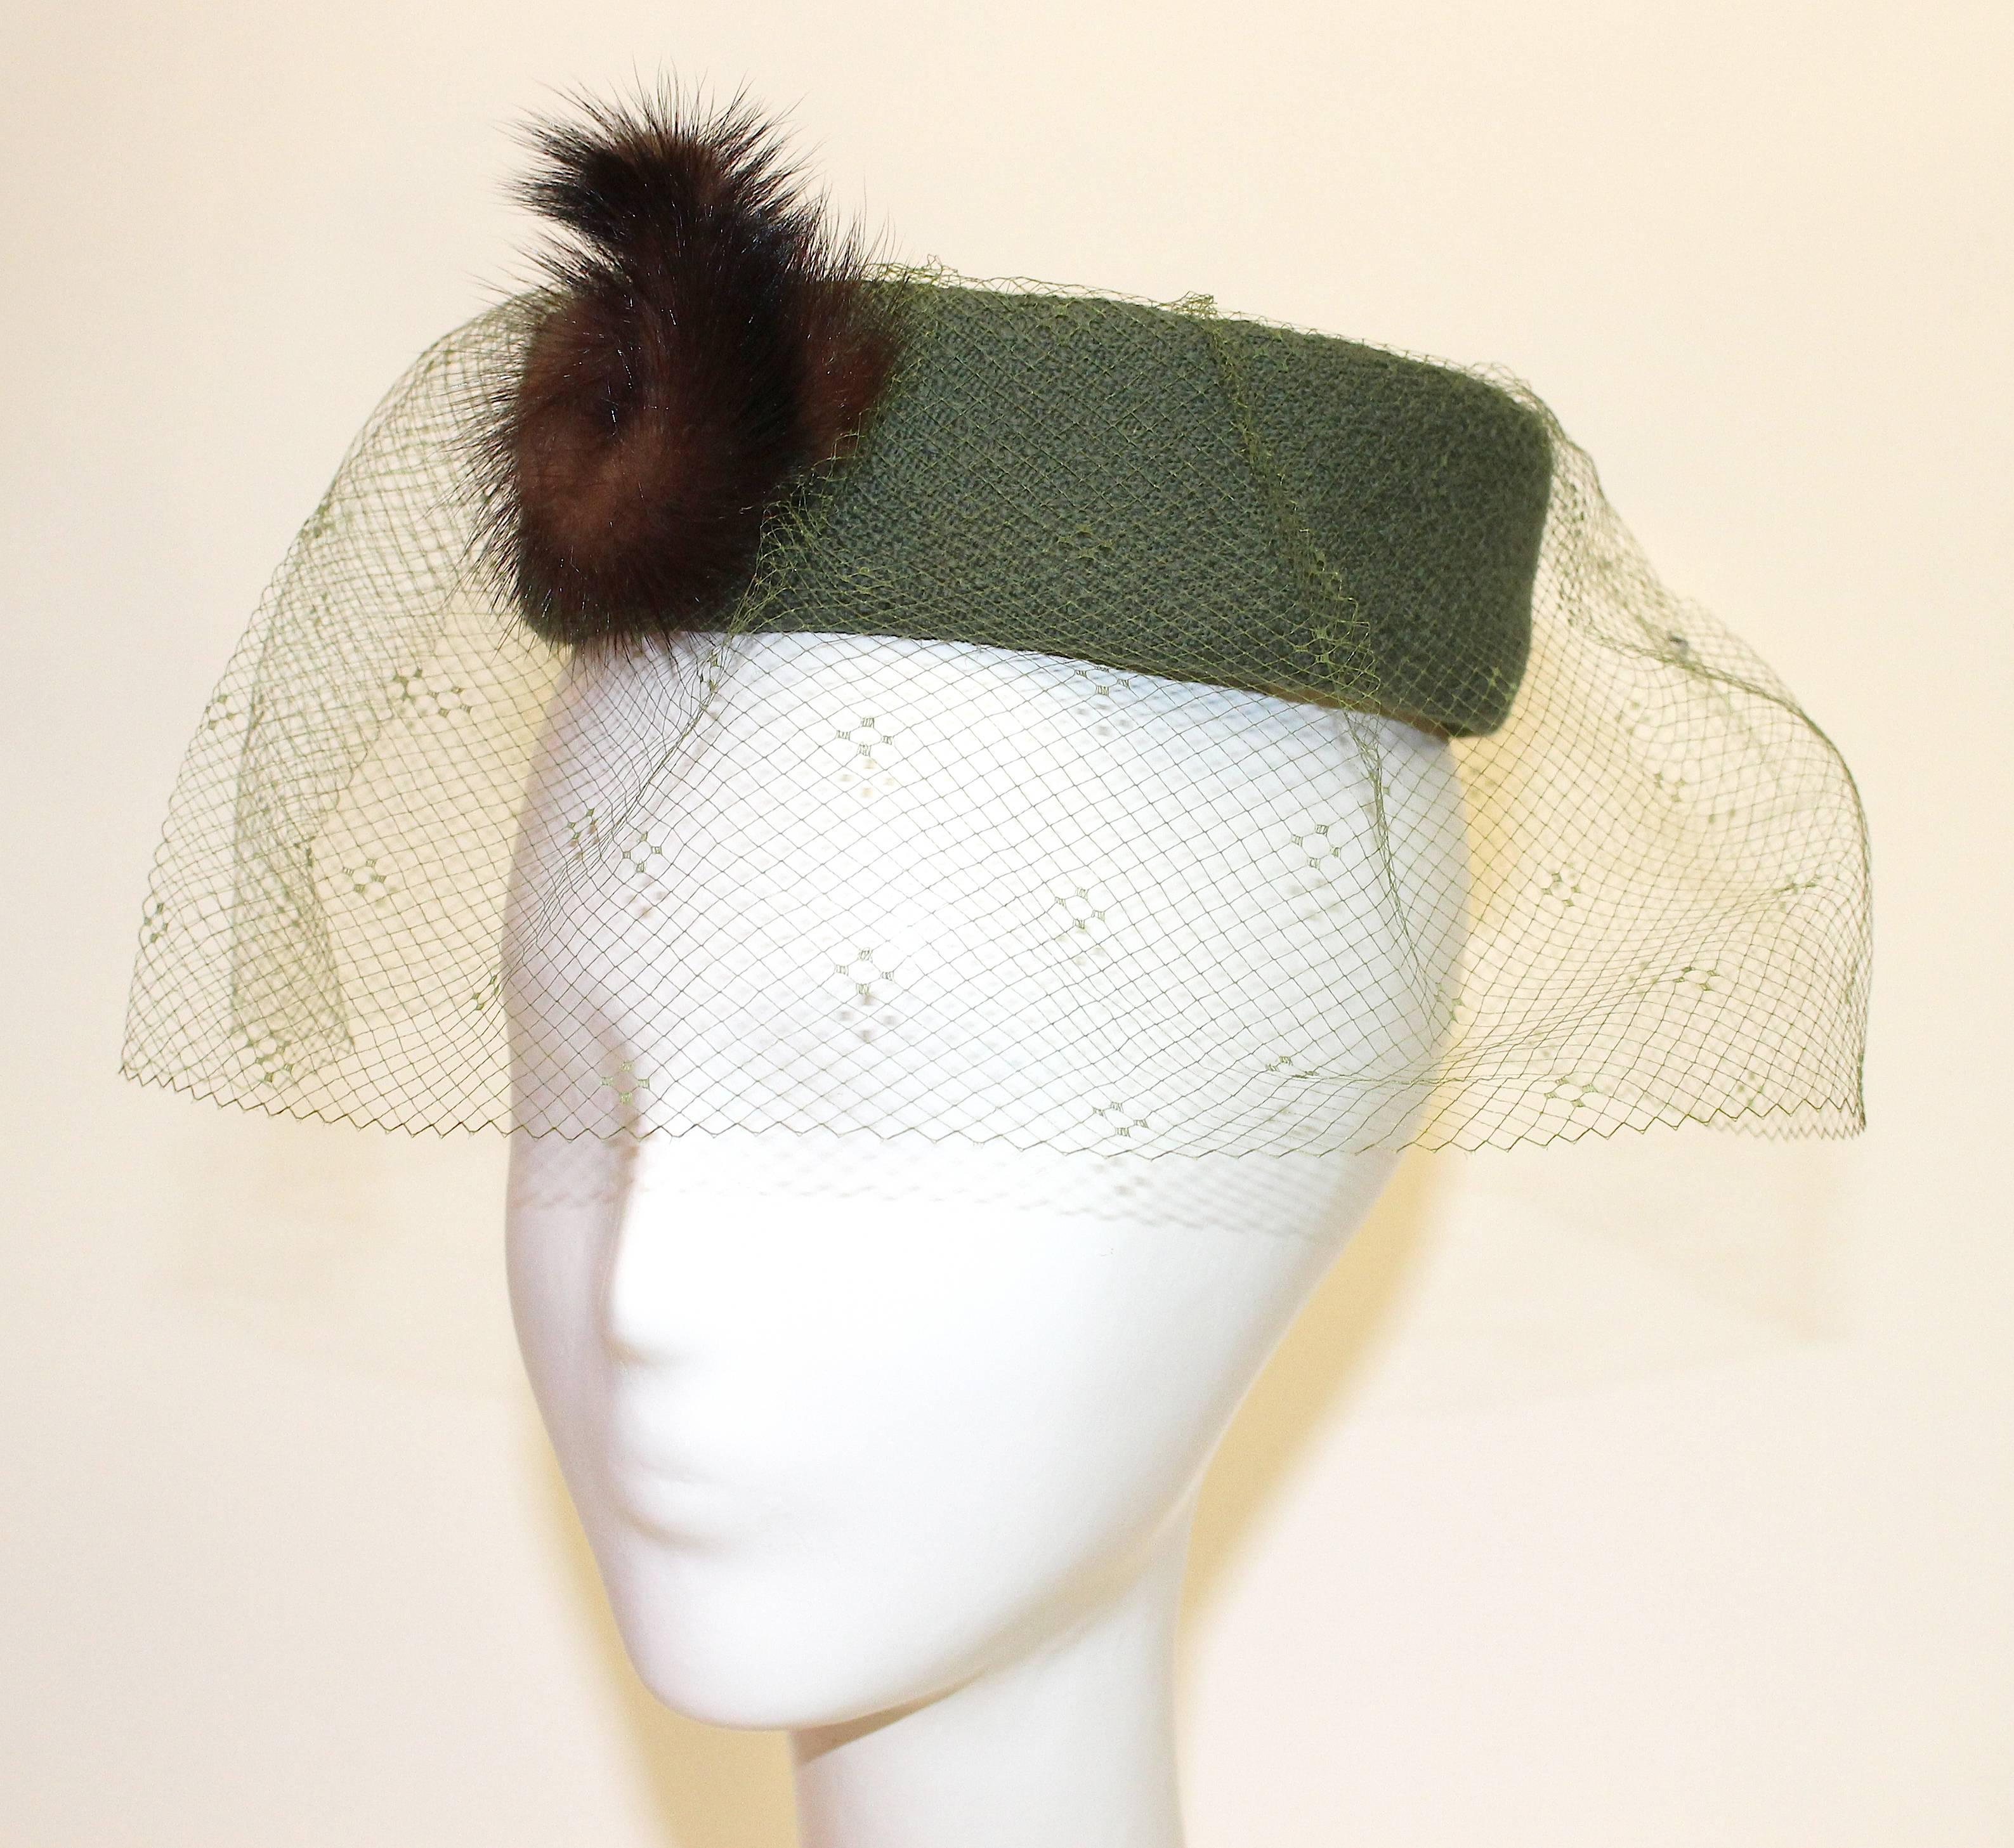 1950s Jack Mann Dress and Matching Hat Both with Mink Fur Accents. Two tone heathered sage green wool gaberdine.   Mink buttons. Matching pillbox hat with veil and mink embellishment. 

Measurements:
Dress
Bust: 34